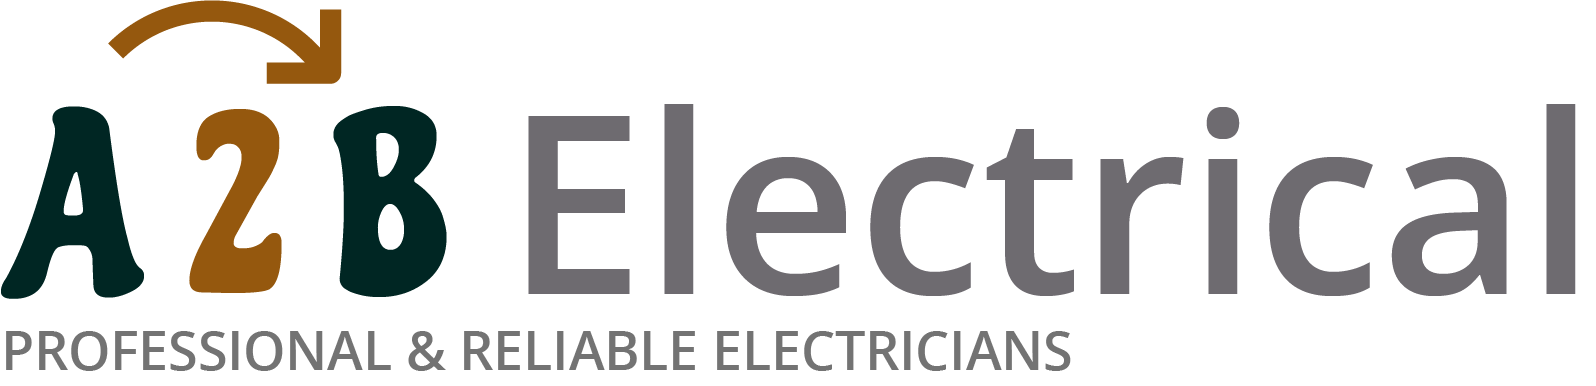 If you have electrical wiring problems in Chigwell, we can provide an electrician to have a look for you. 